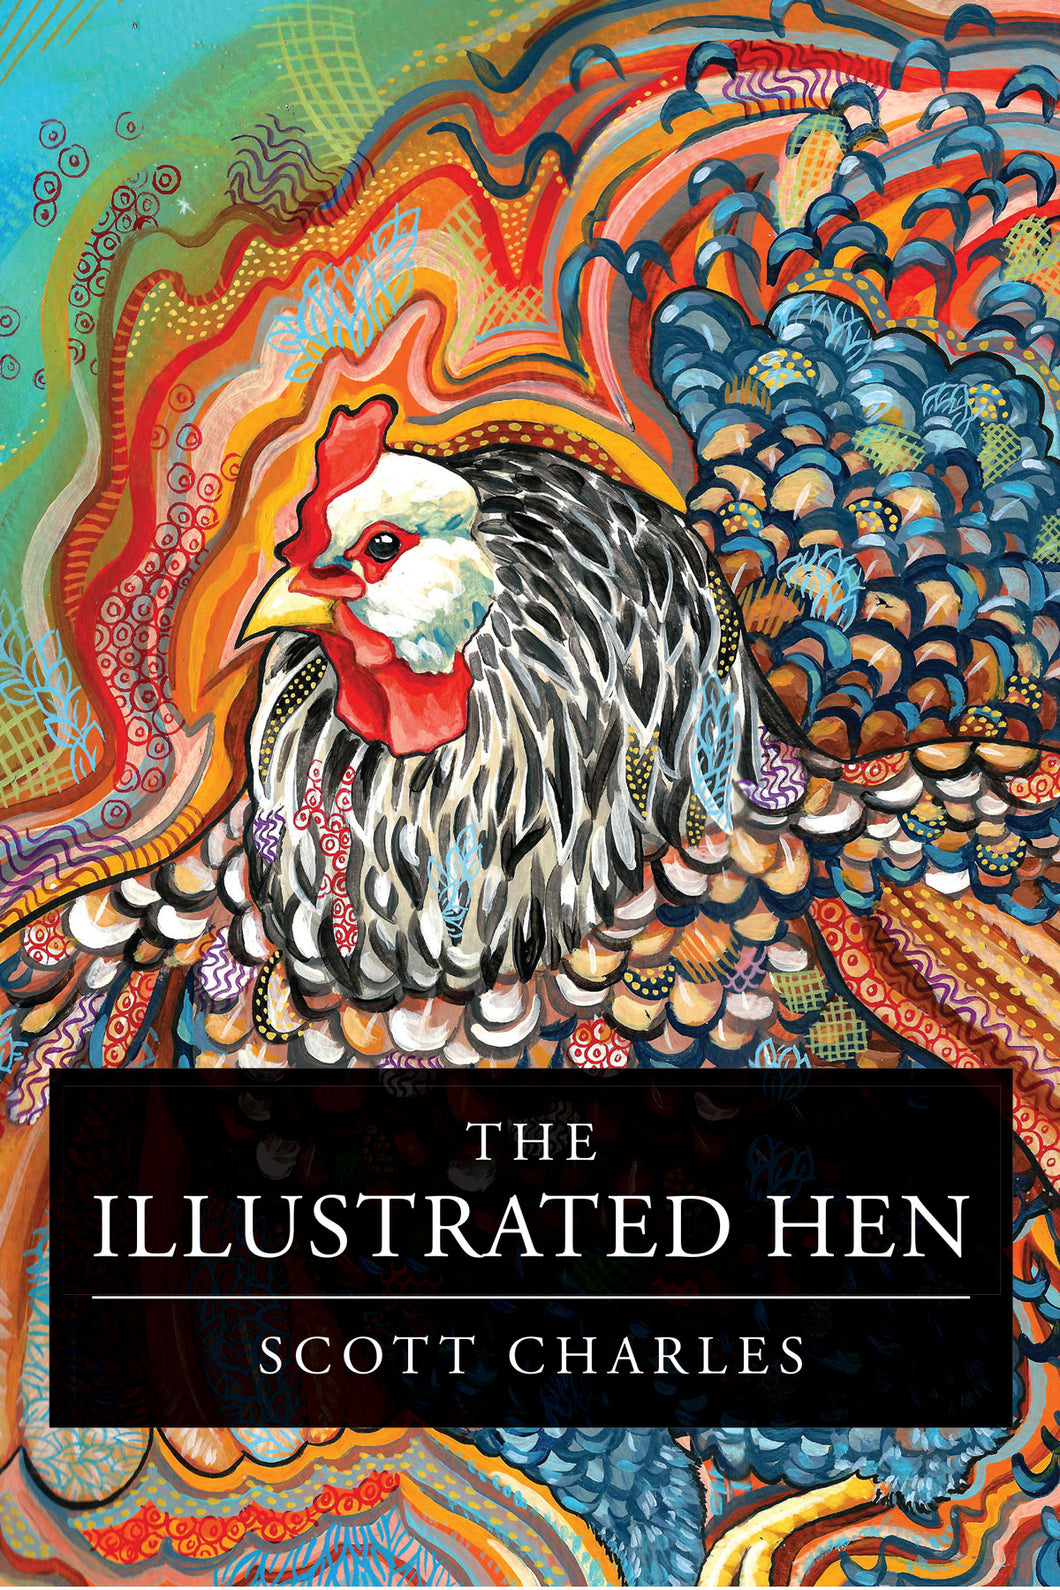 The Illustrated Hen